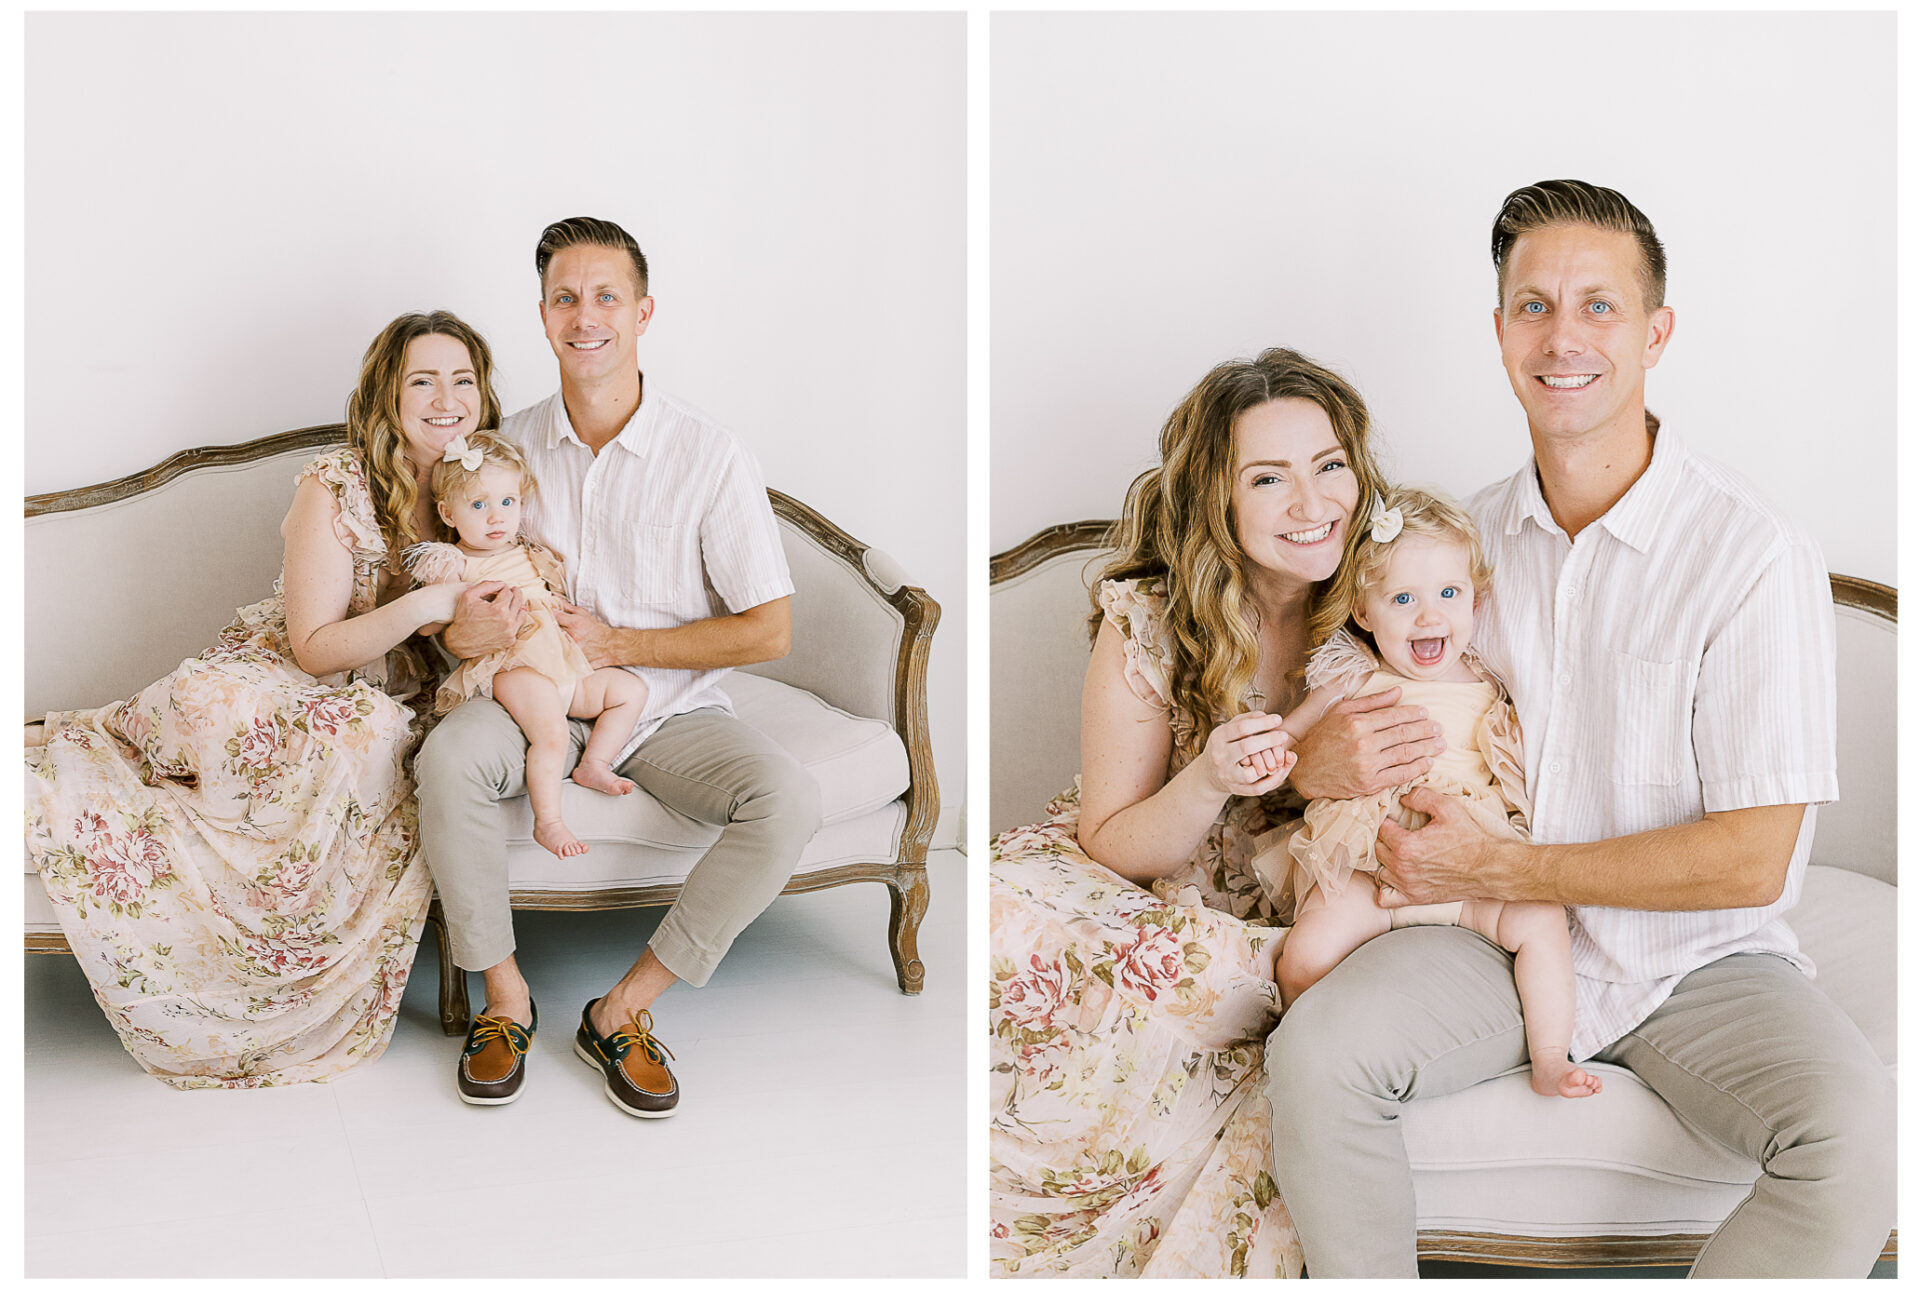 Winter Freire Photography | First birthday photos for baby girl in a photography studio being held by her parents